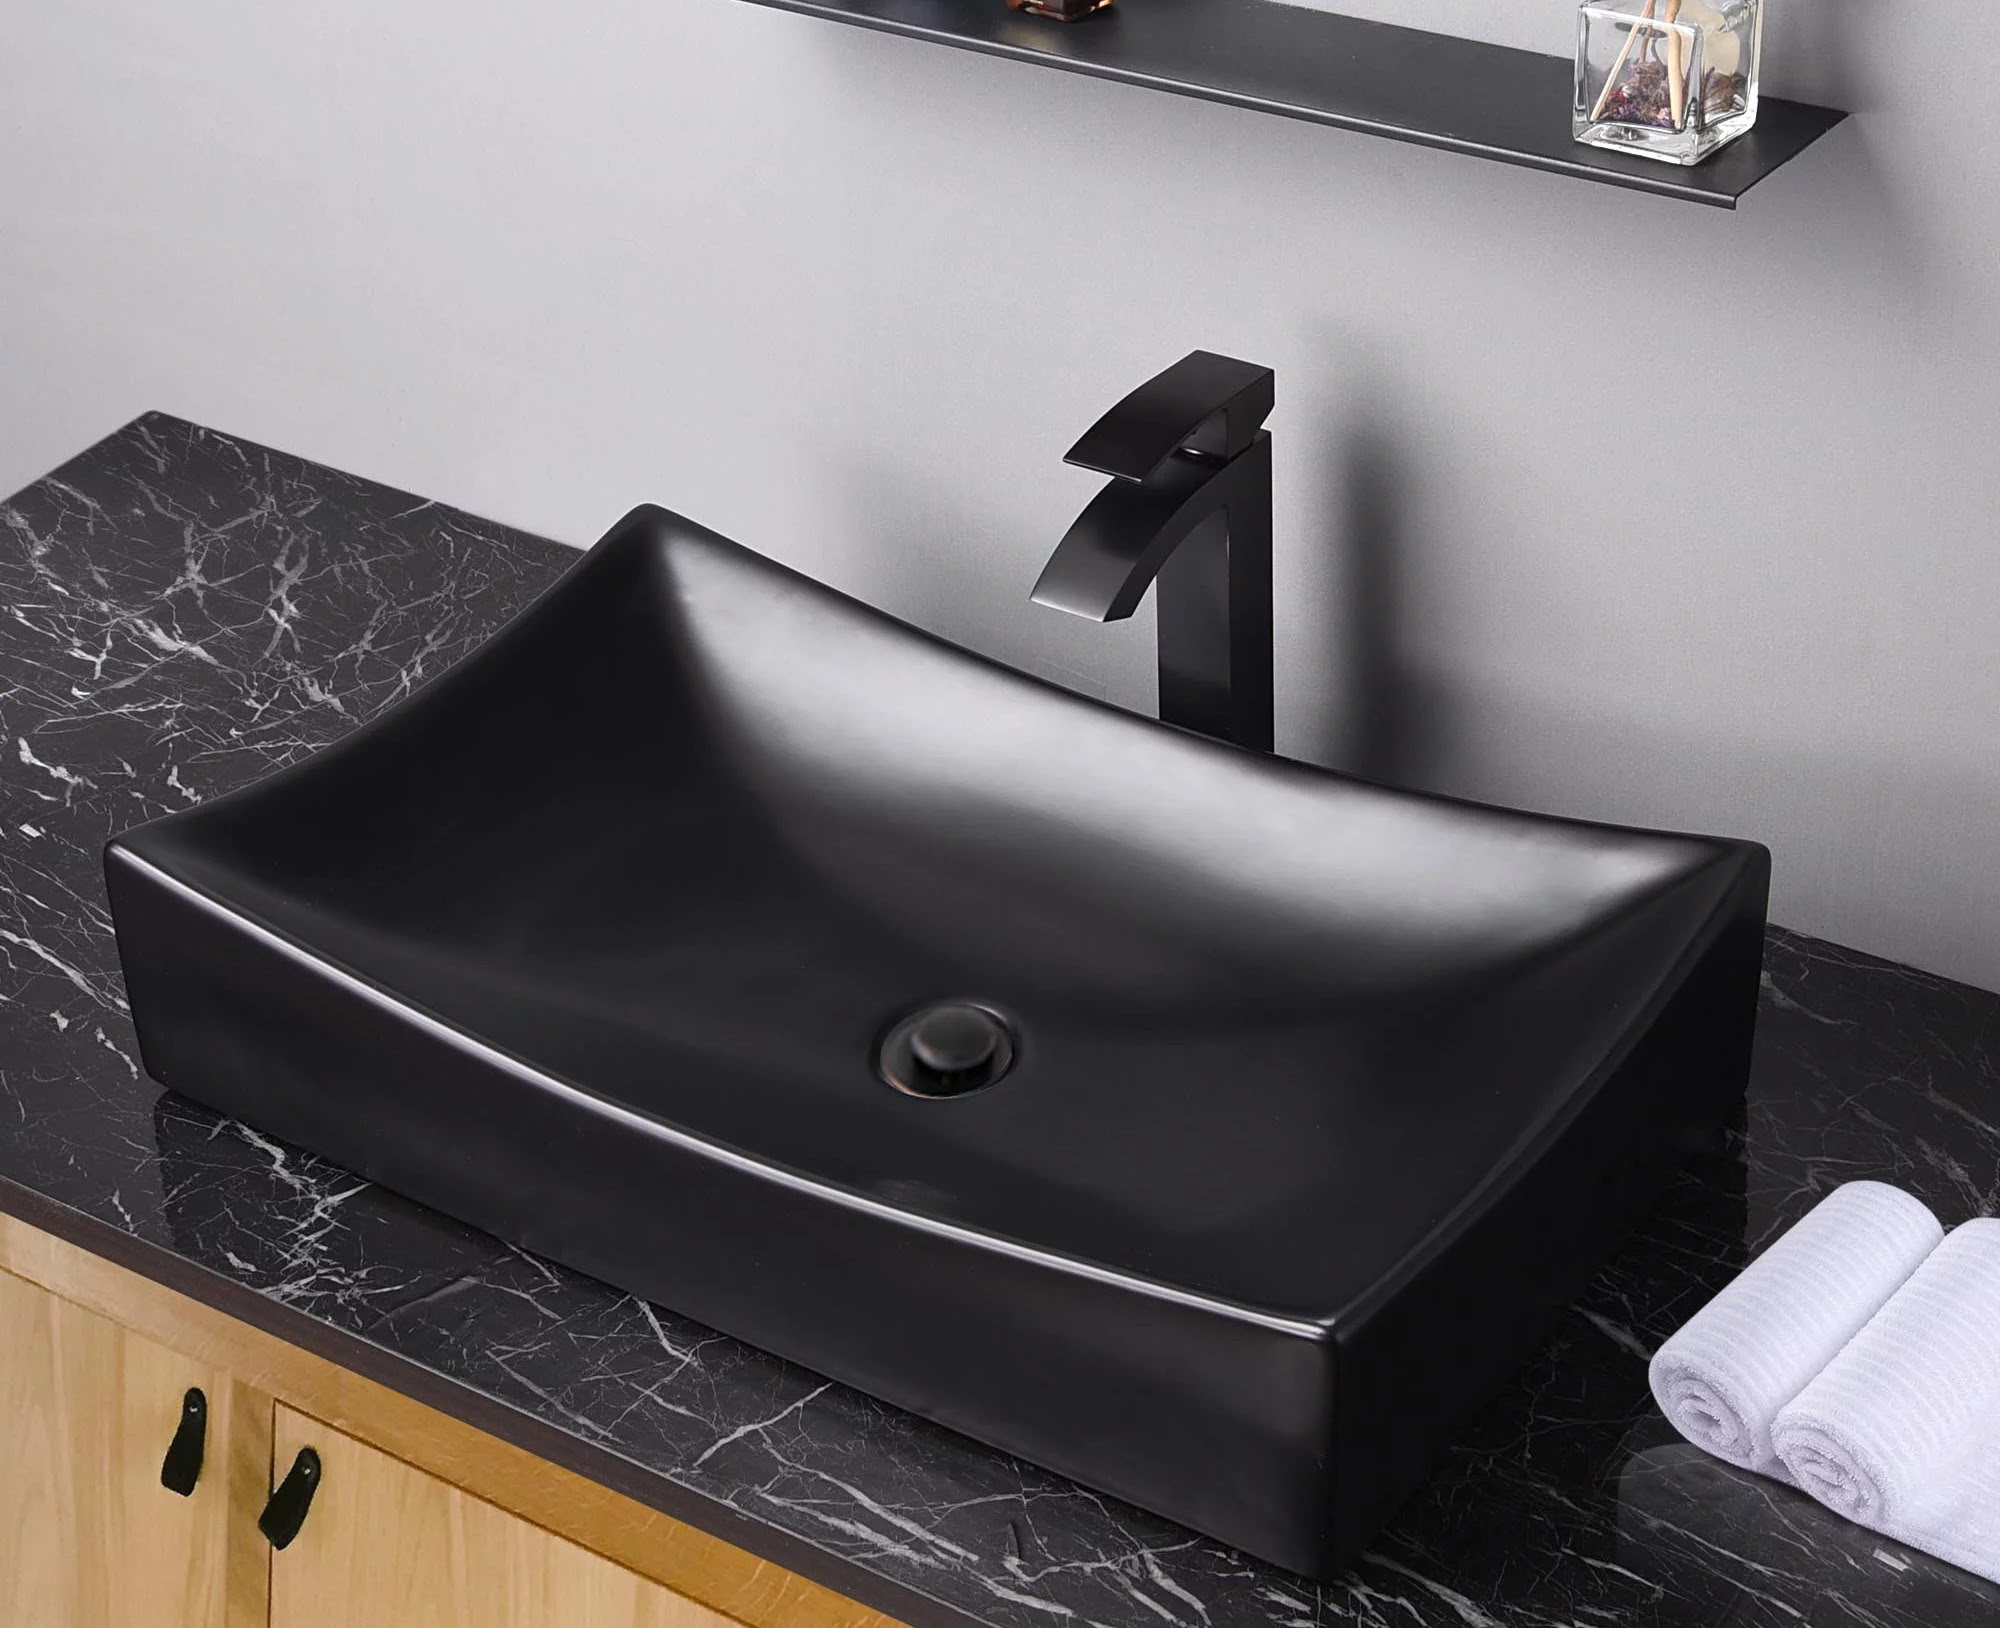 How To Clean A Black Porcelain Sink